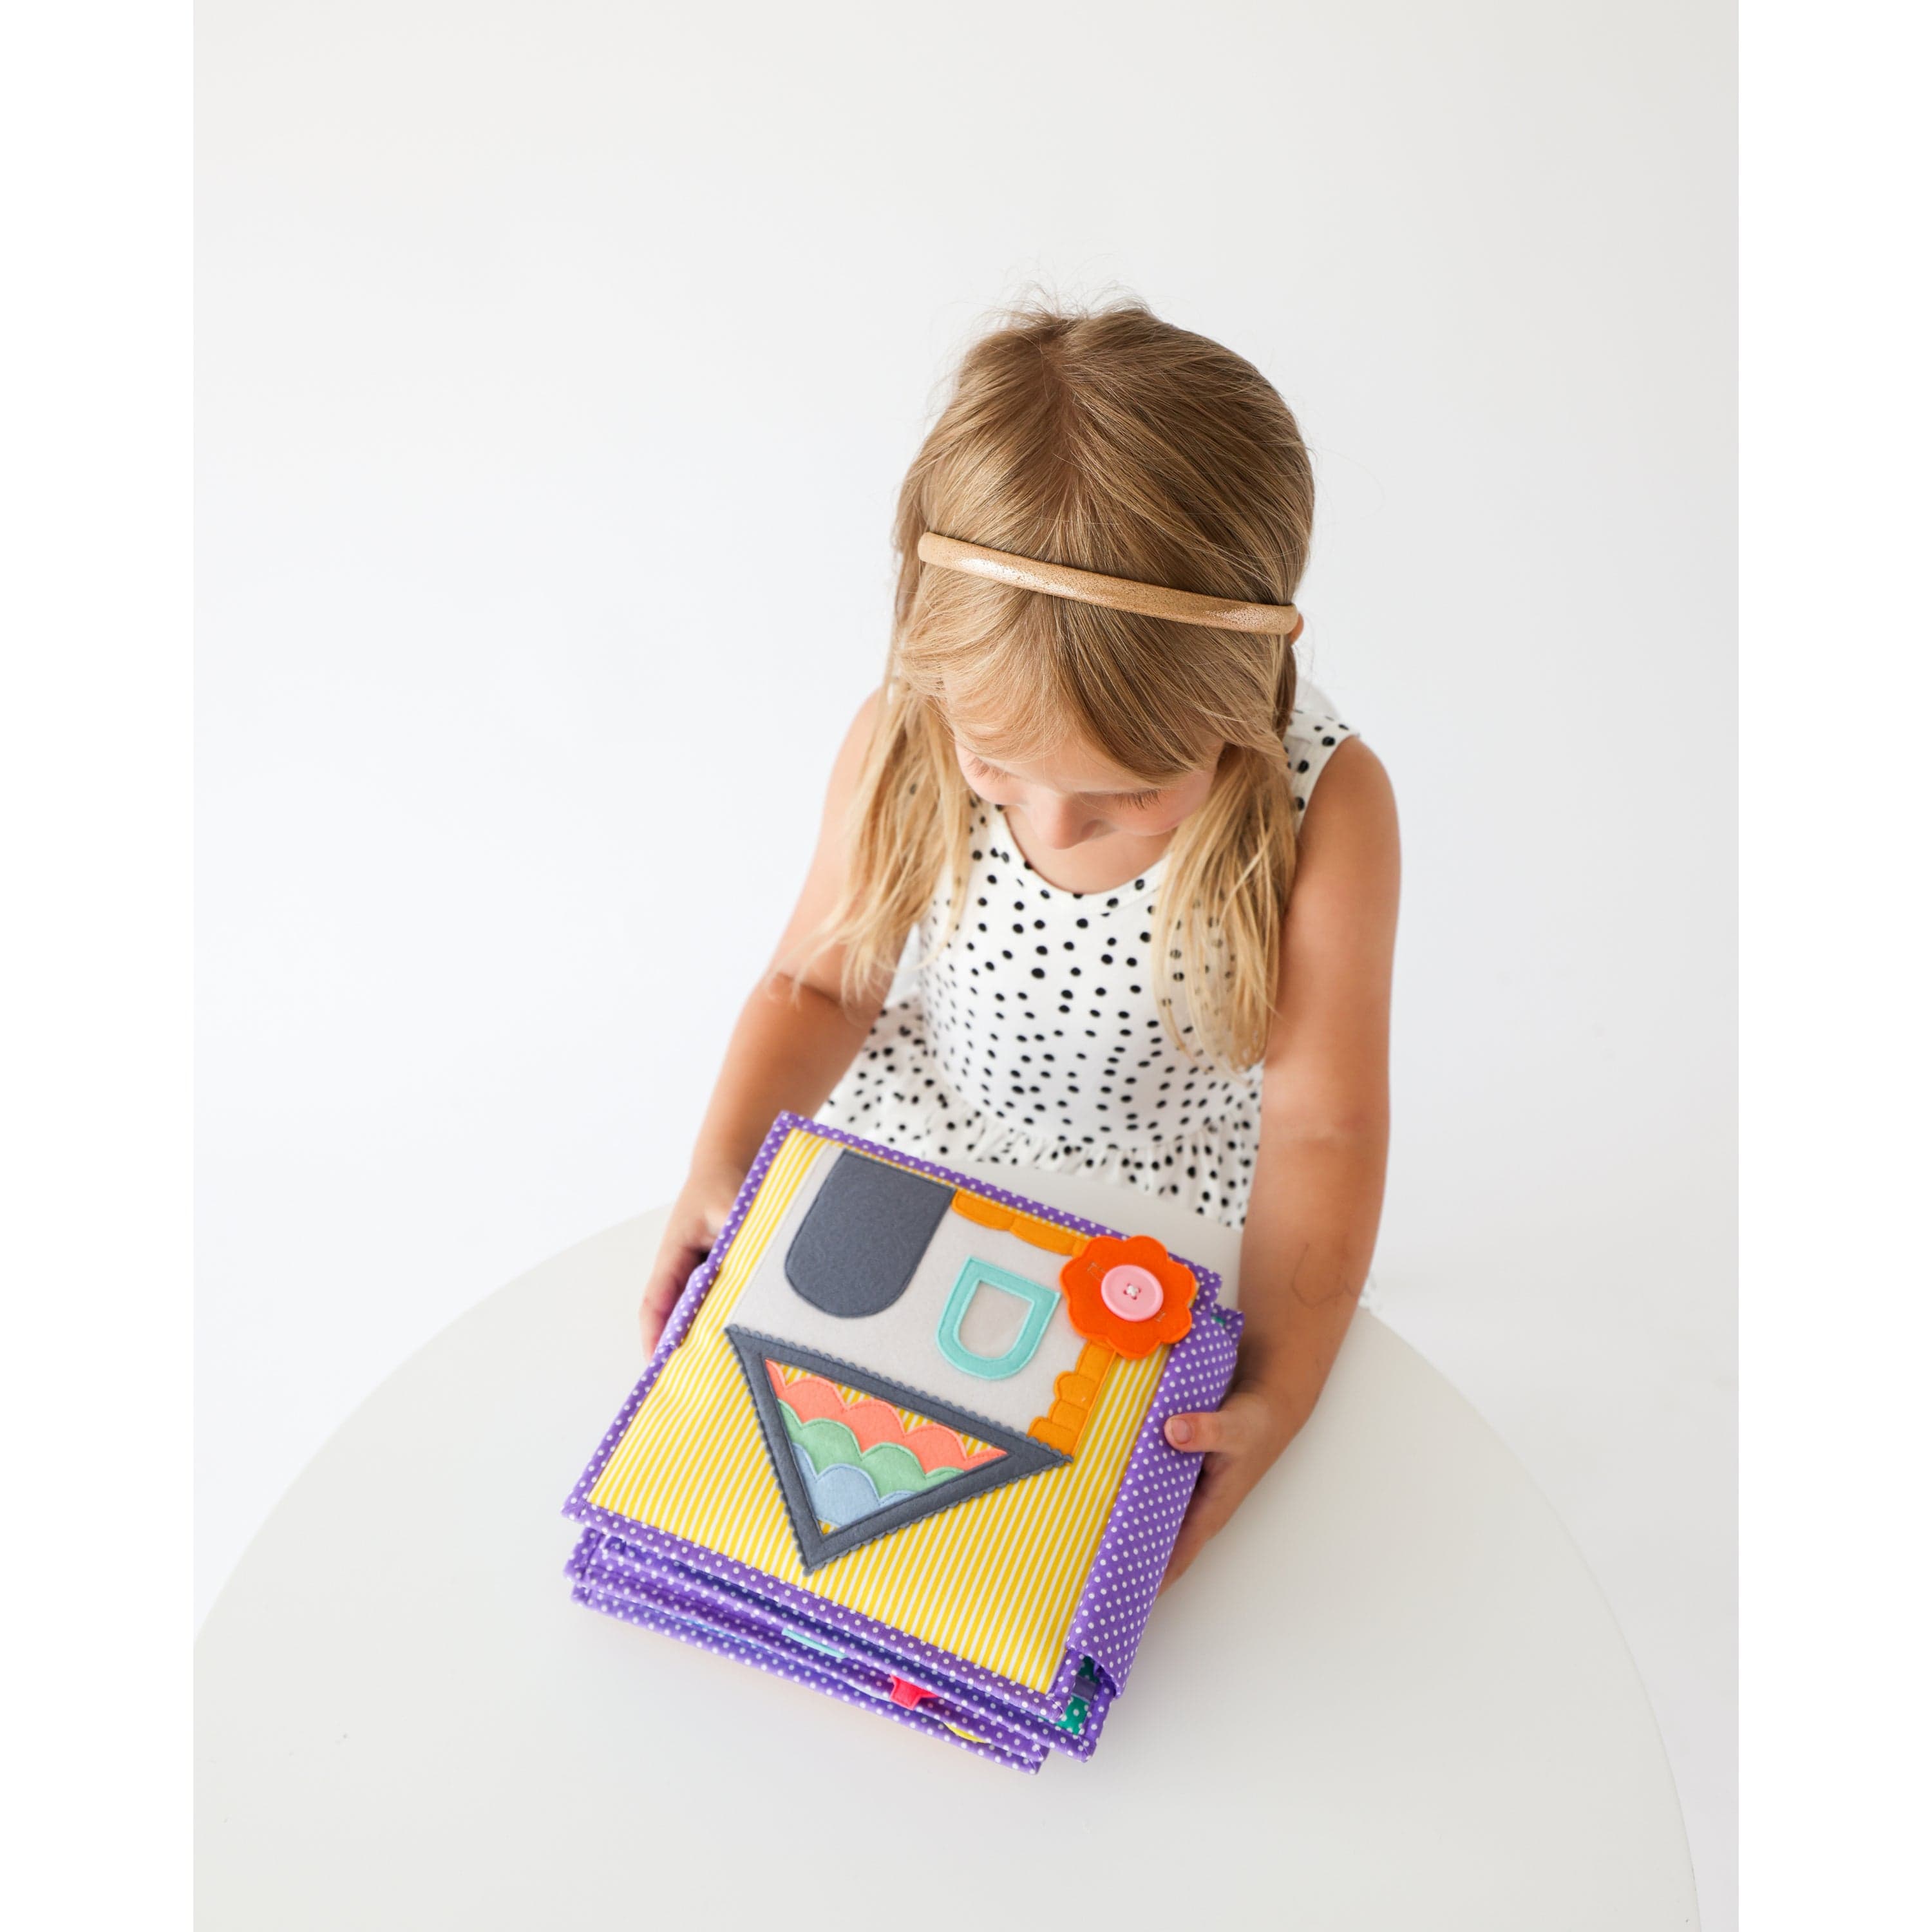 Bestselling Creative Play Quiet Book Educating AMY Lil Tulips